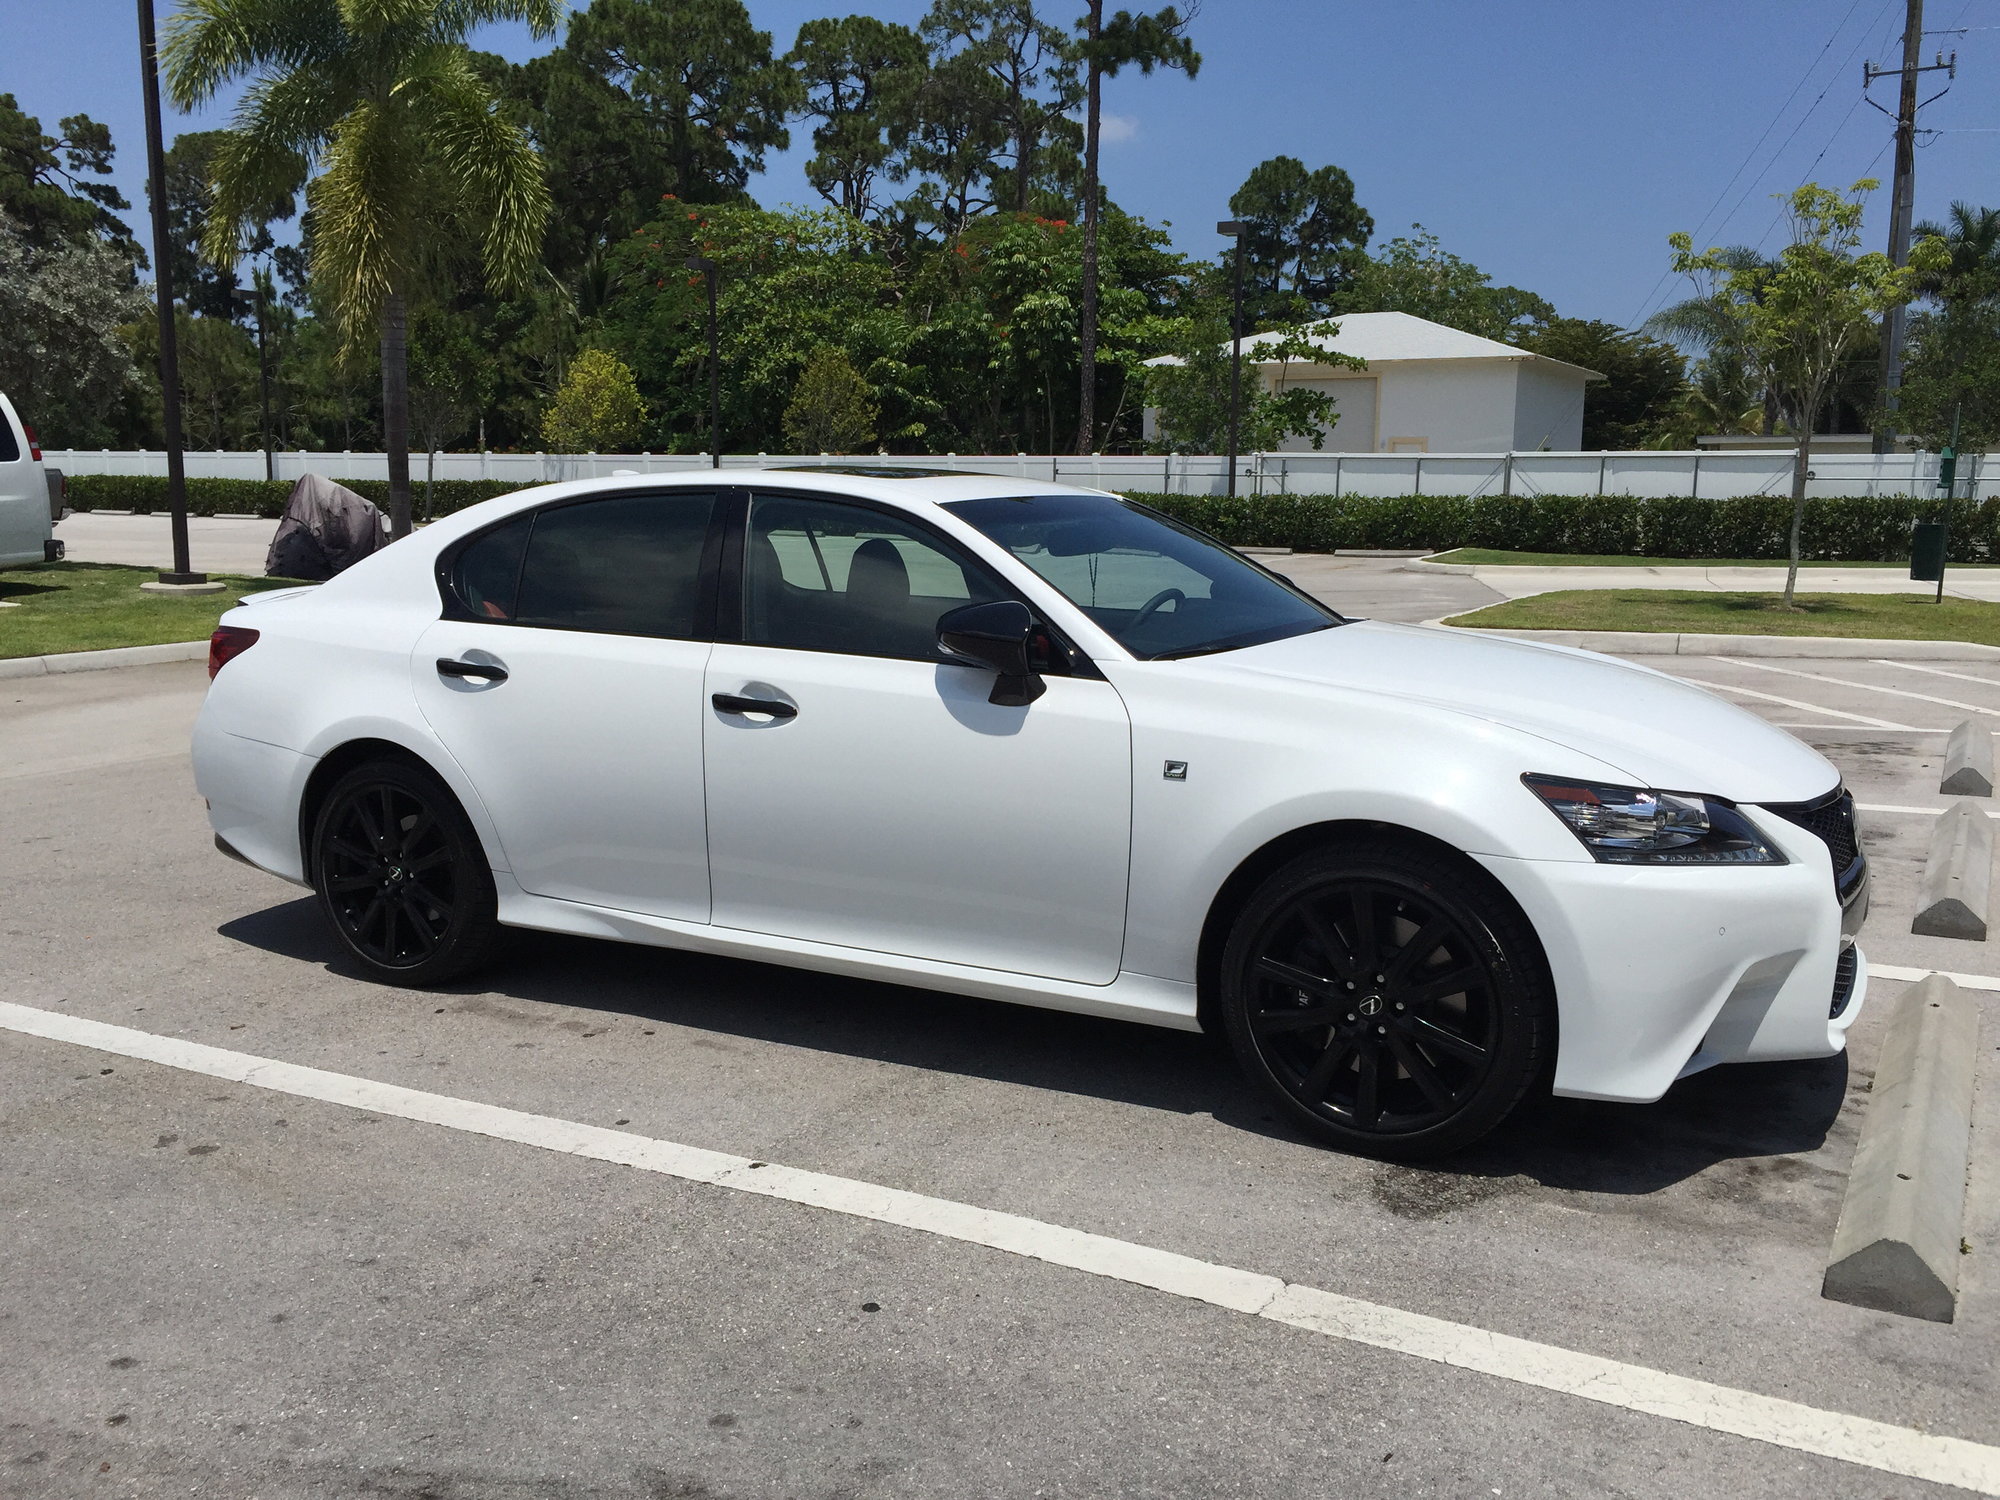 15 Lexus Gs 350 F Sport Crafted Edition Silly Problems With 1000 Miles Clublexus Lexus Forum Discussion